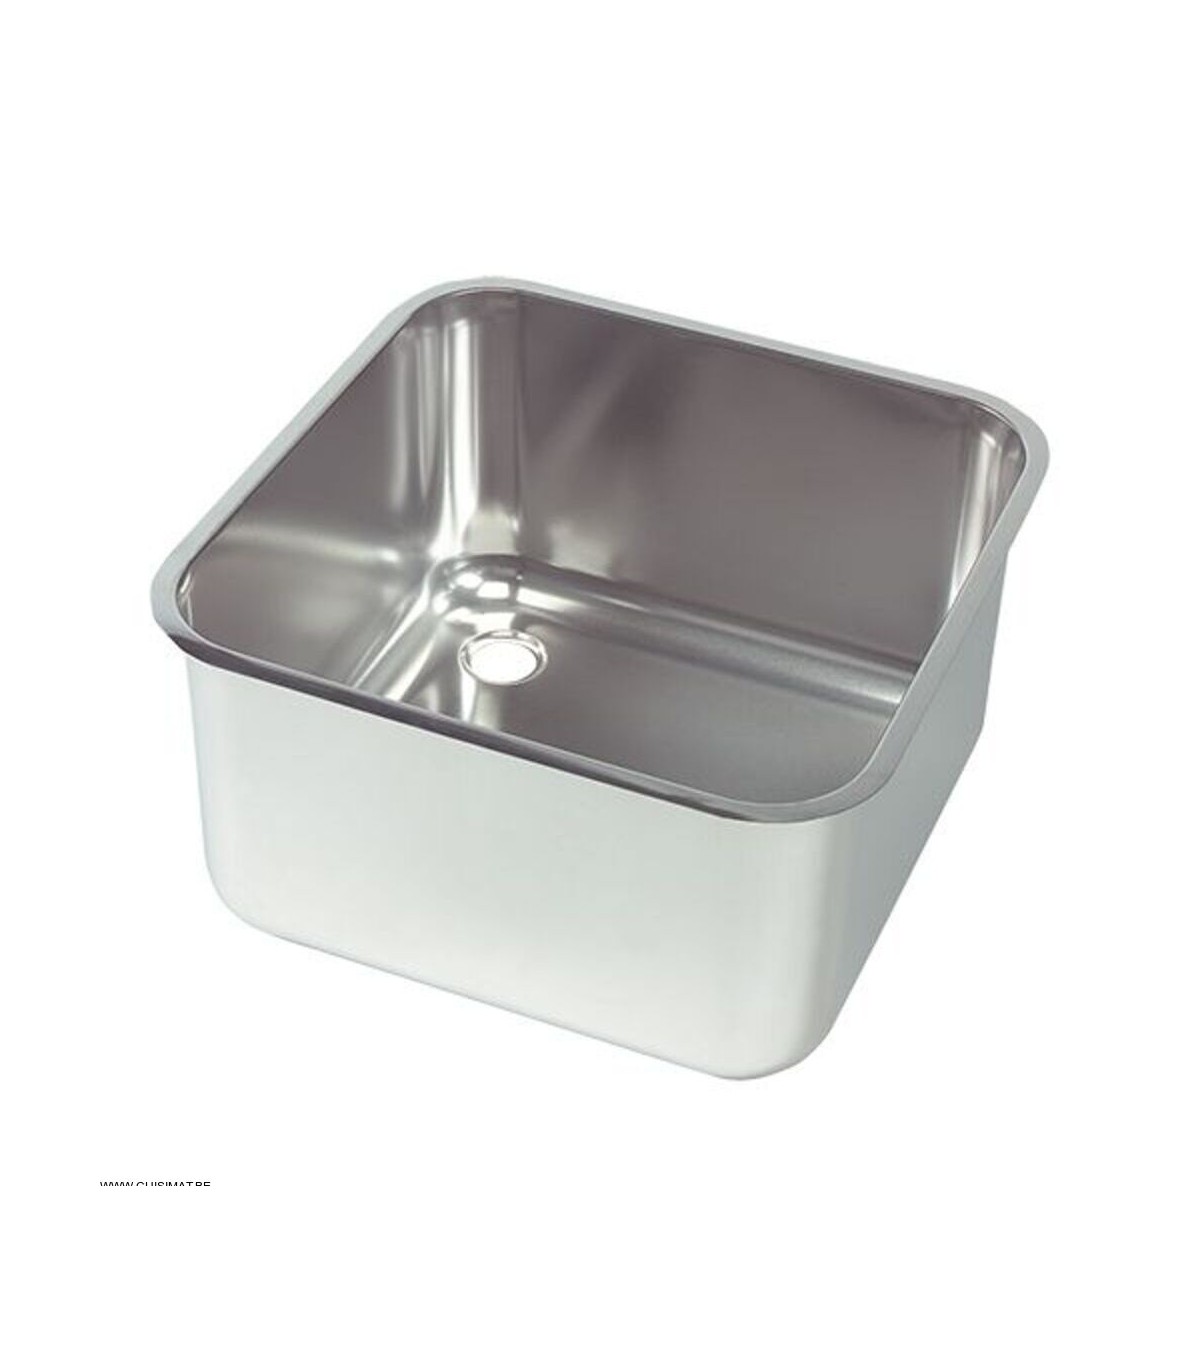 Evier Inox PLANET Encastrable Inlav 40 + Couvercle